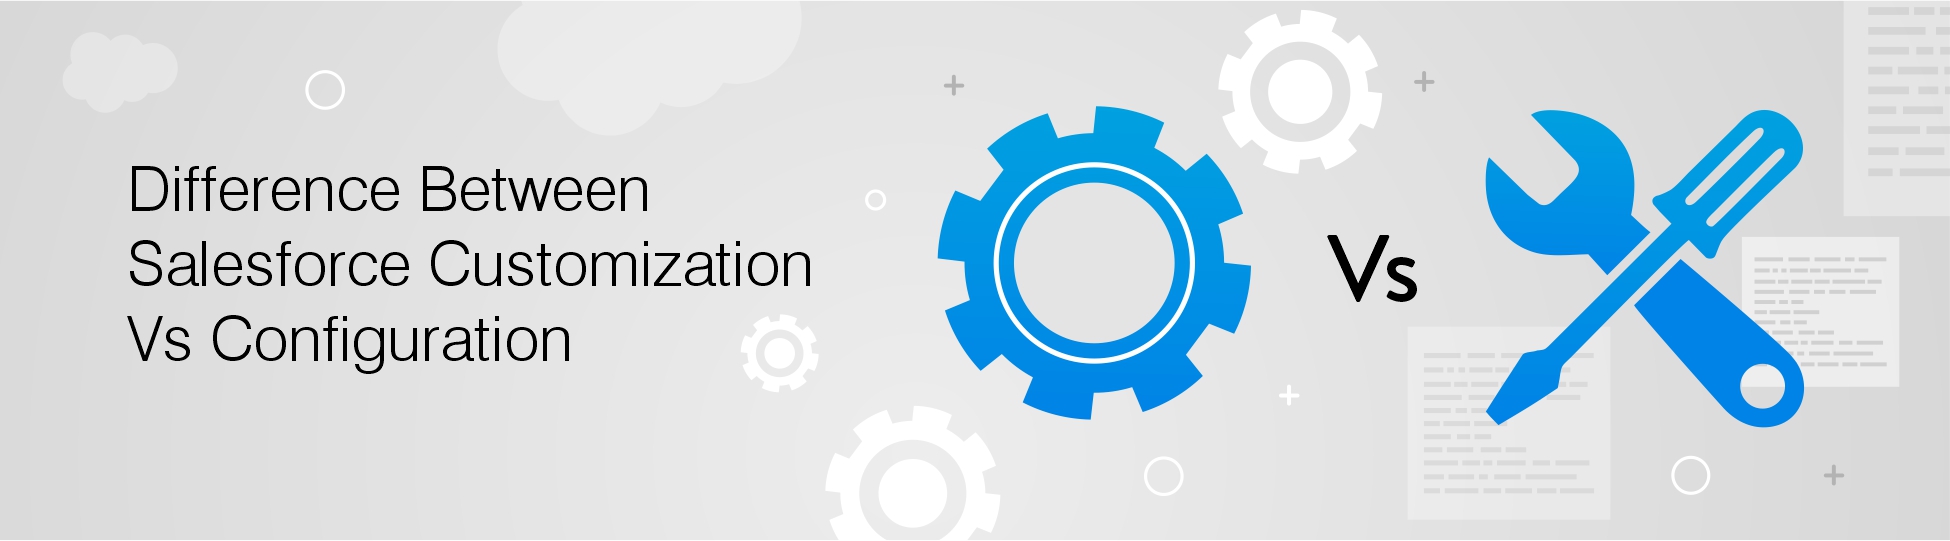 Difference-Between-Salesforce-Customization-Vs-Configuration